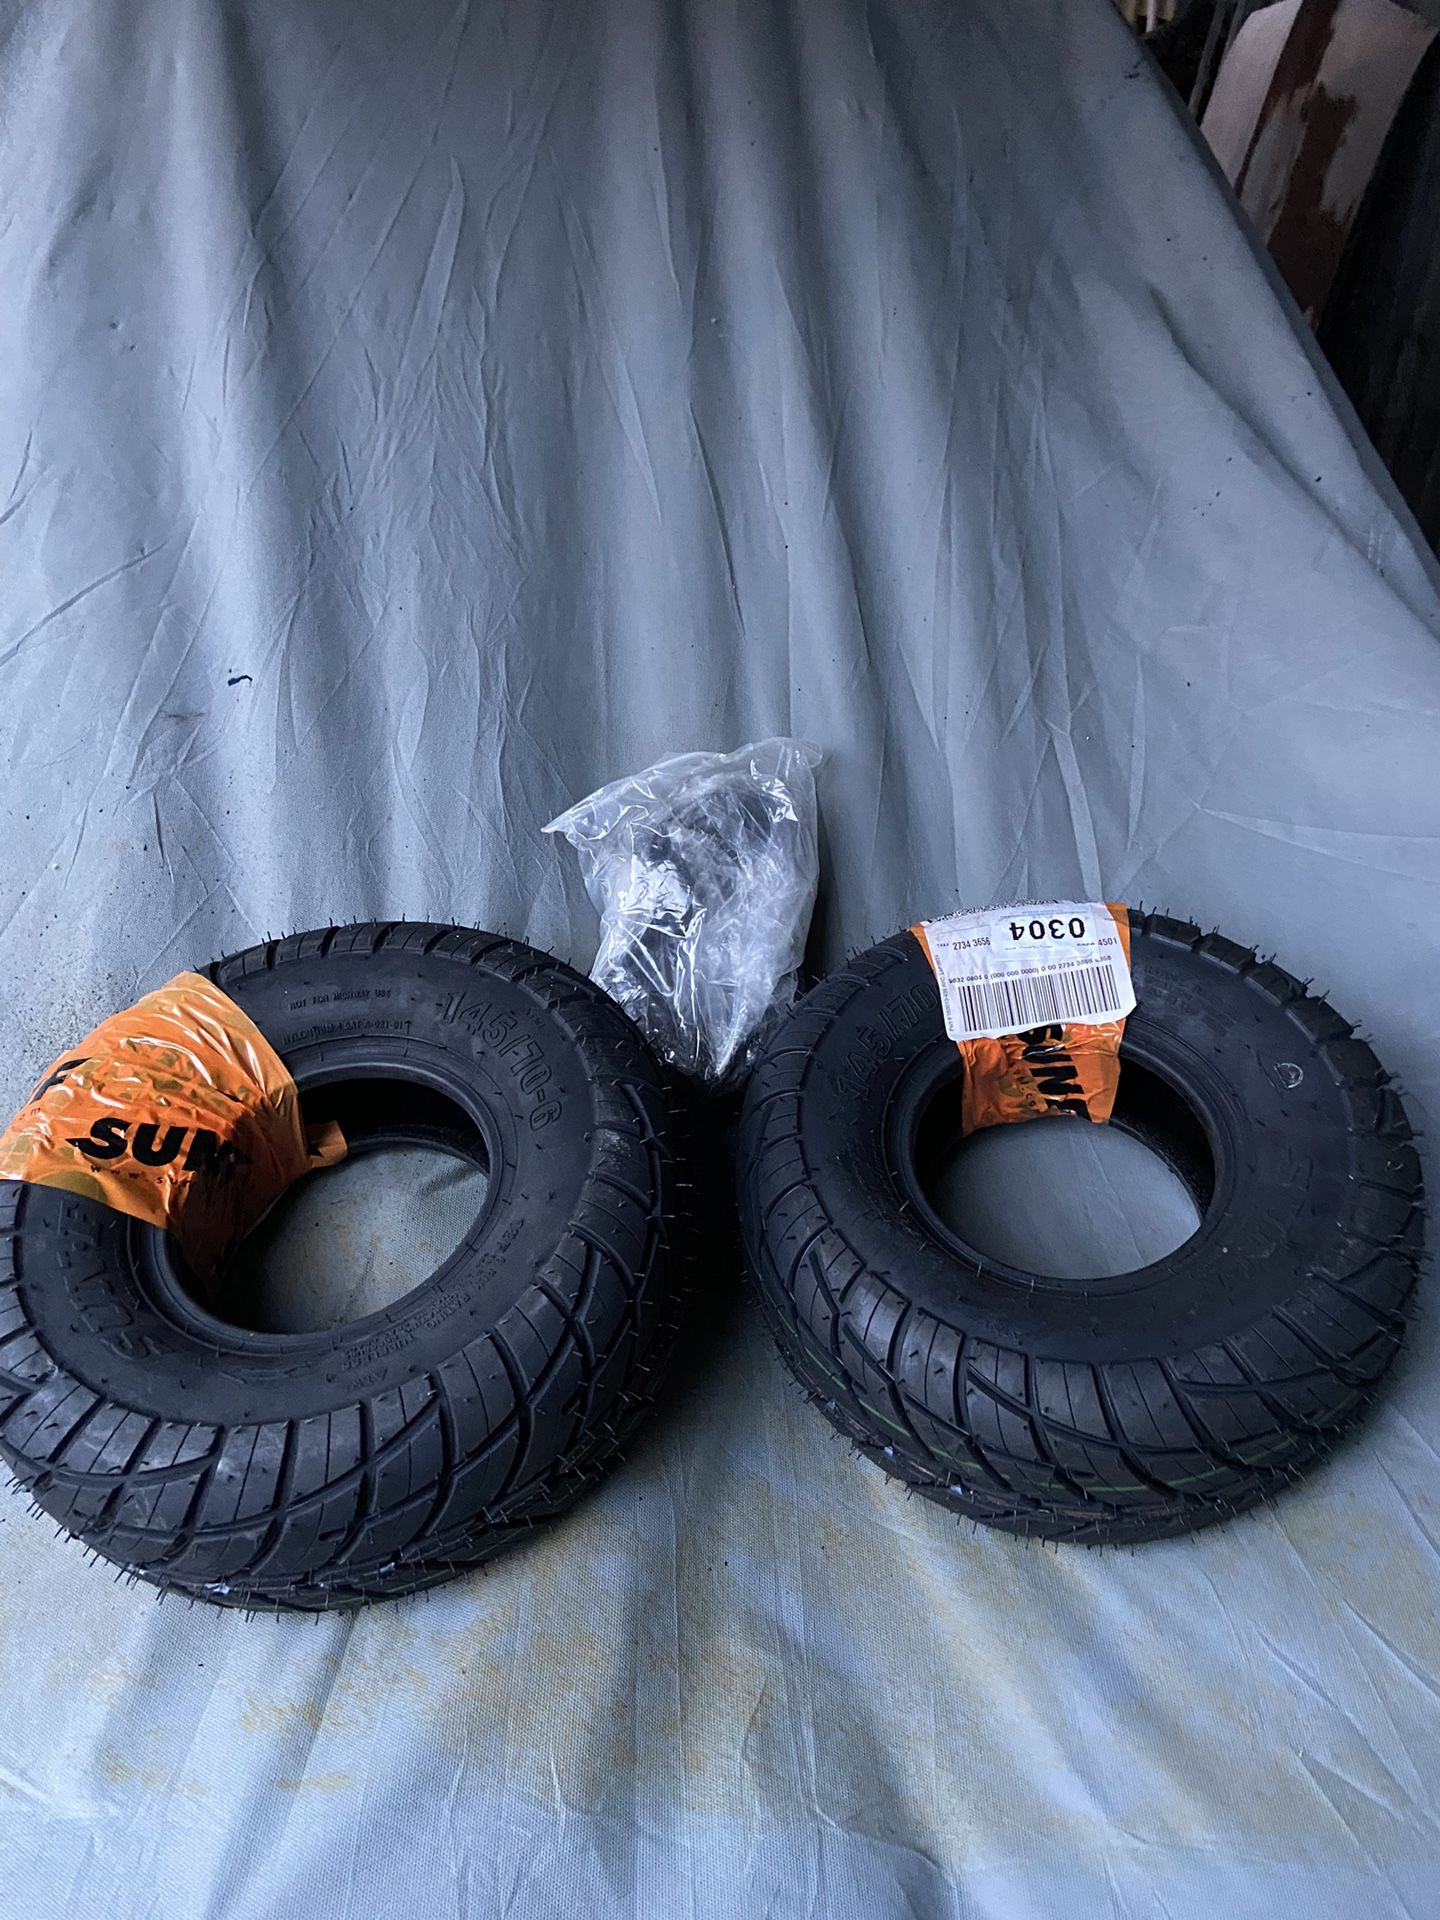 Tires For Sale 